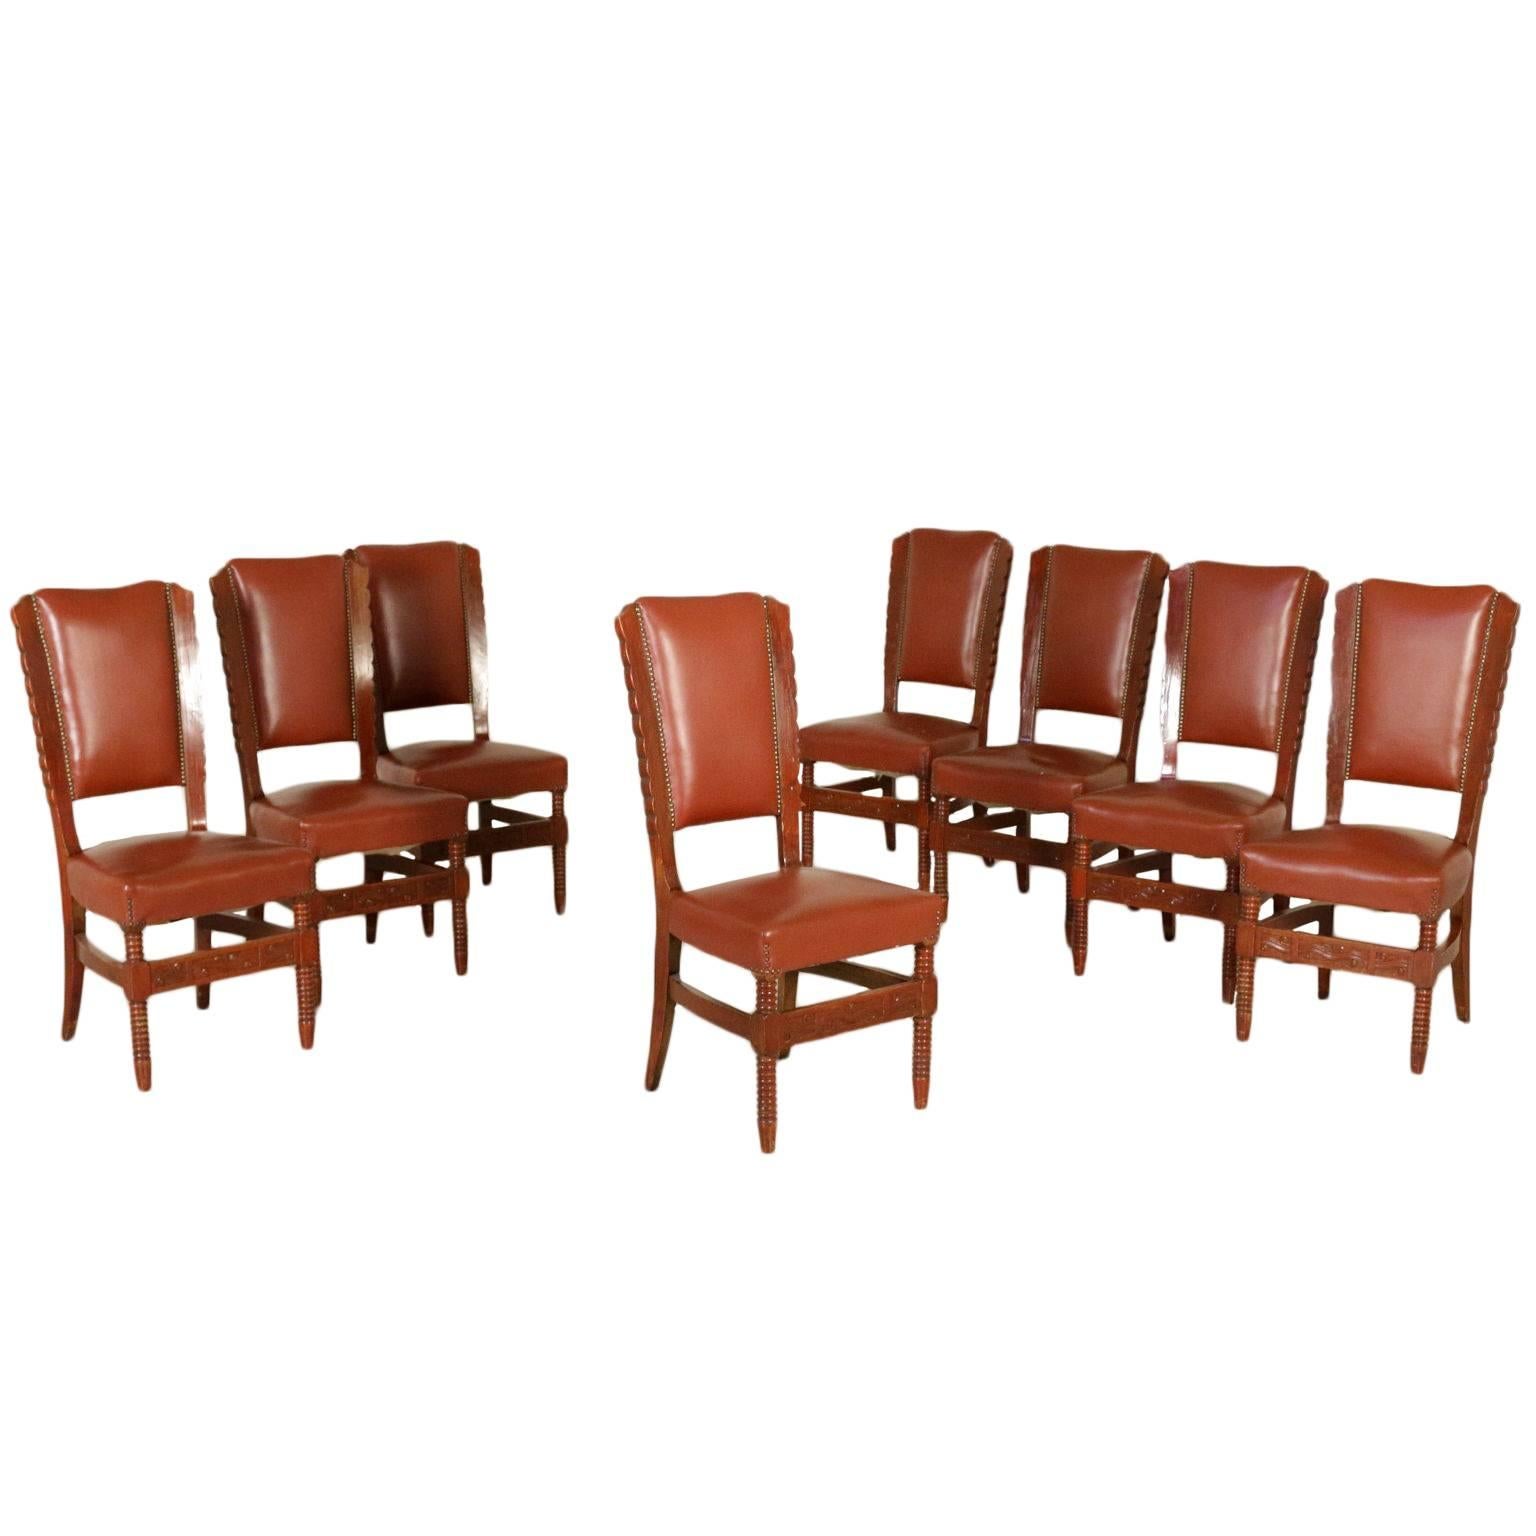 Set of Eight Chairs Stained Beech Leatherette Vintage, Italy, 1950s